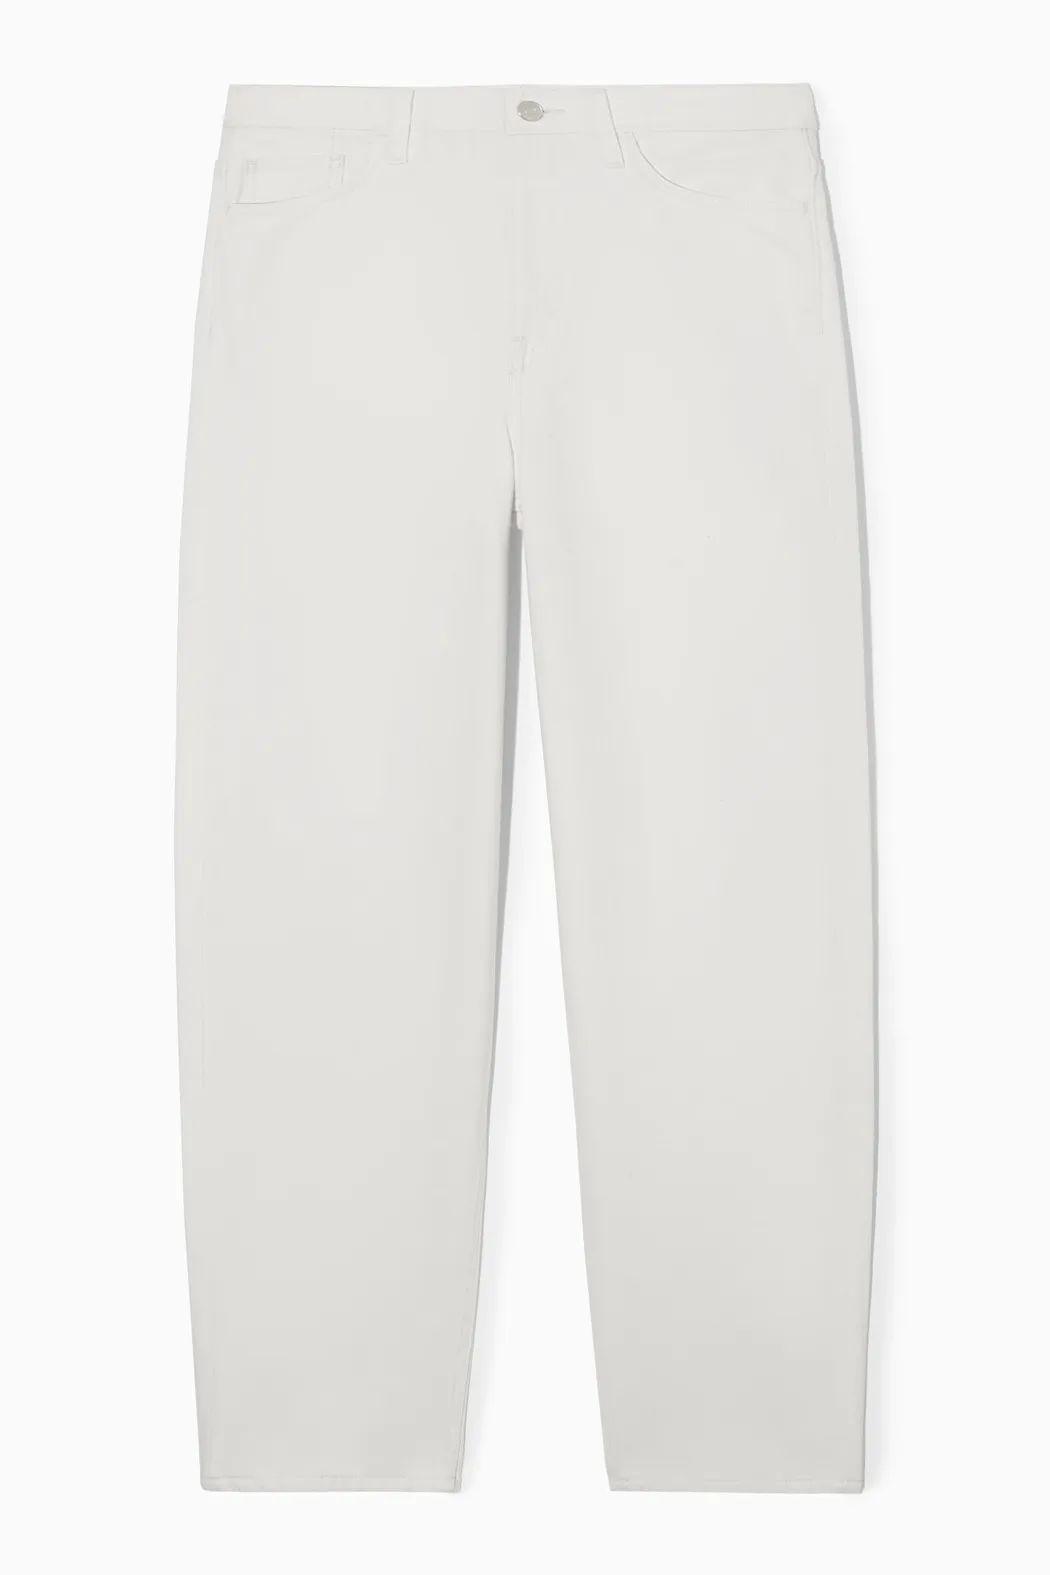 ARCH JEANS - TAPERED - LIGHT ECRU - COS | COS UK